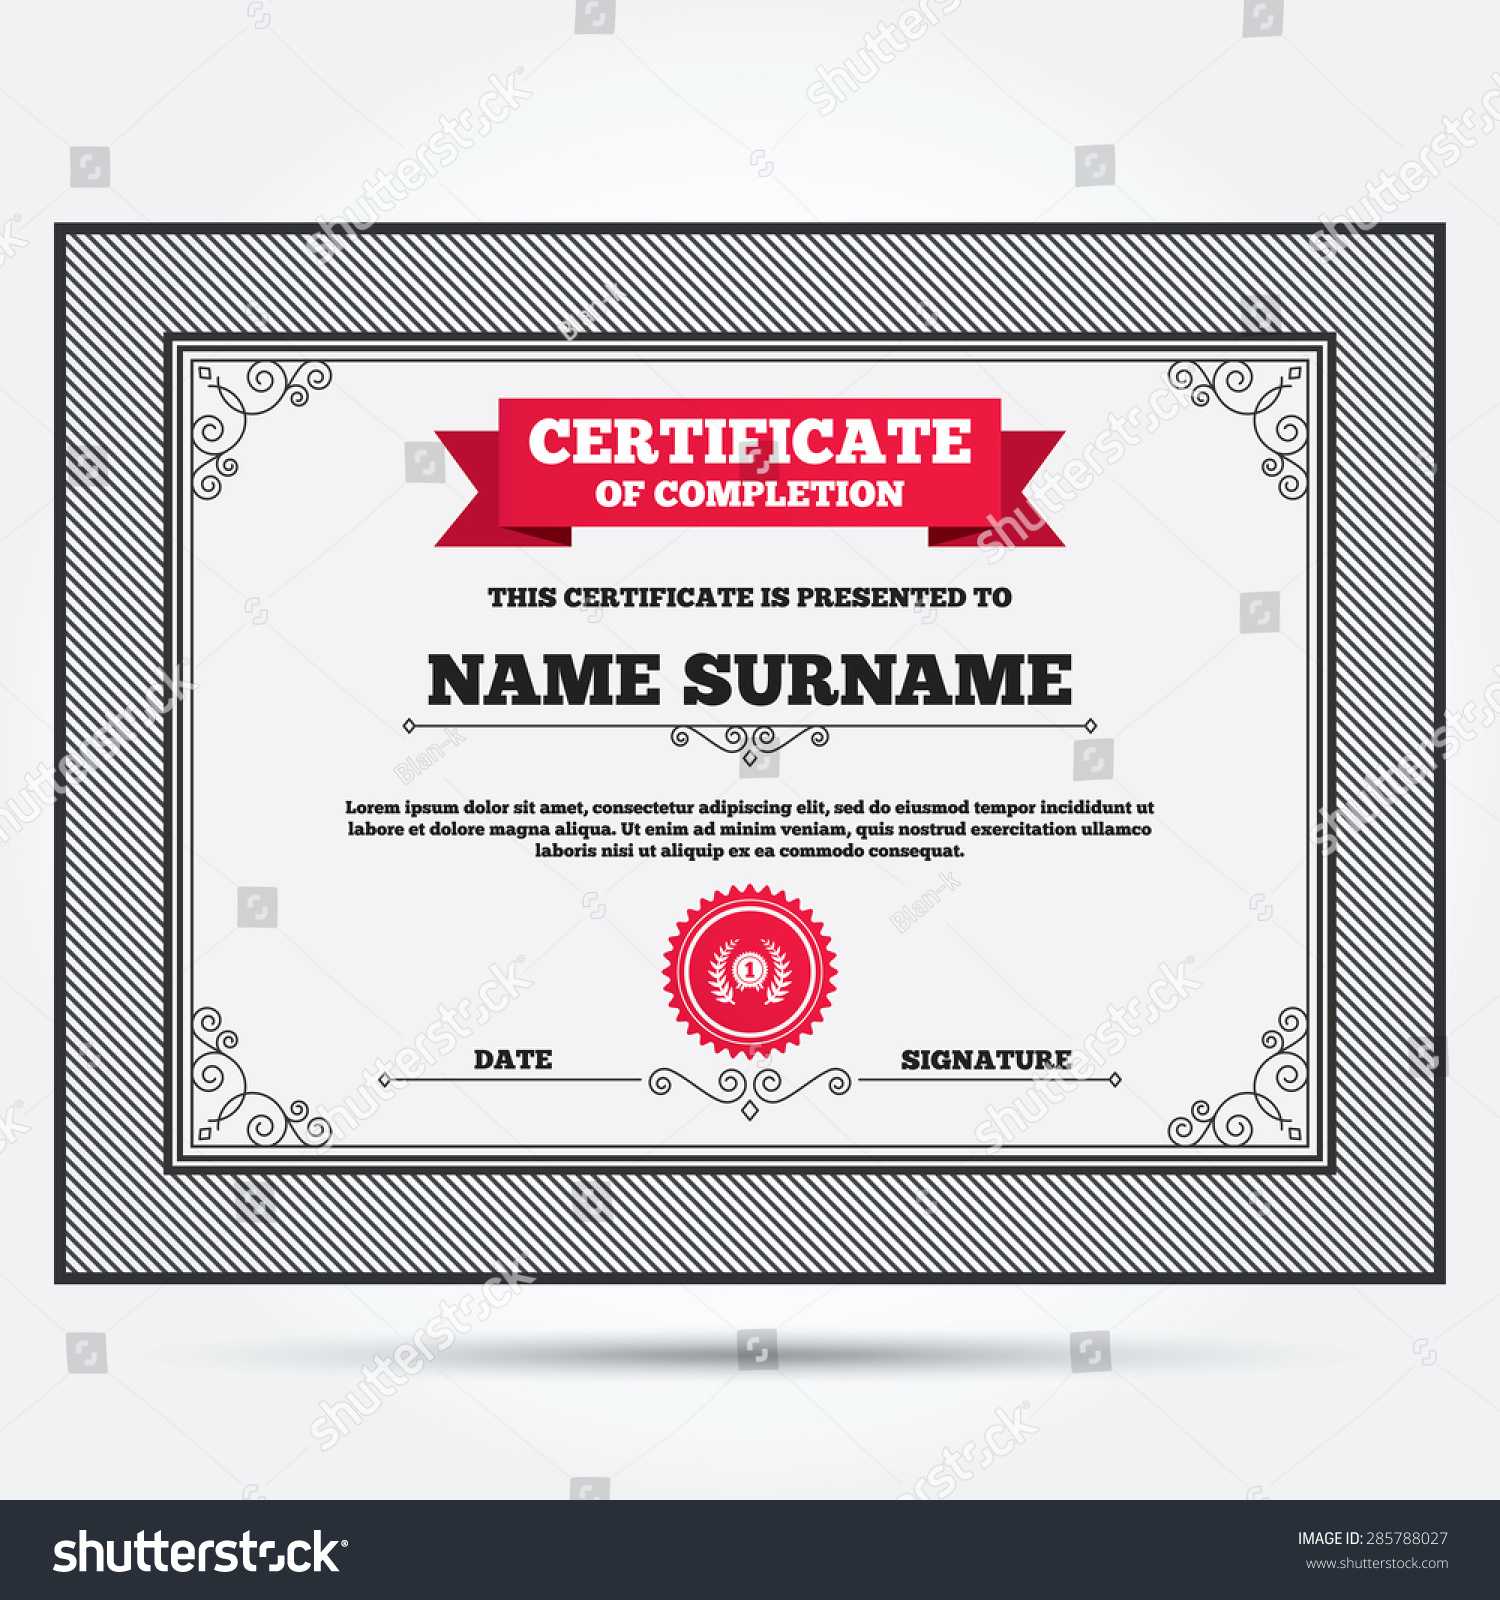 Certificate Completion First Place Award Sign Stock Vector Regarding First Place Certificate Template